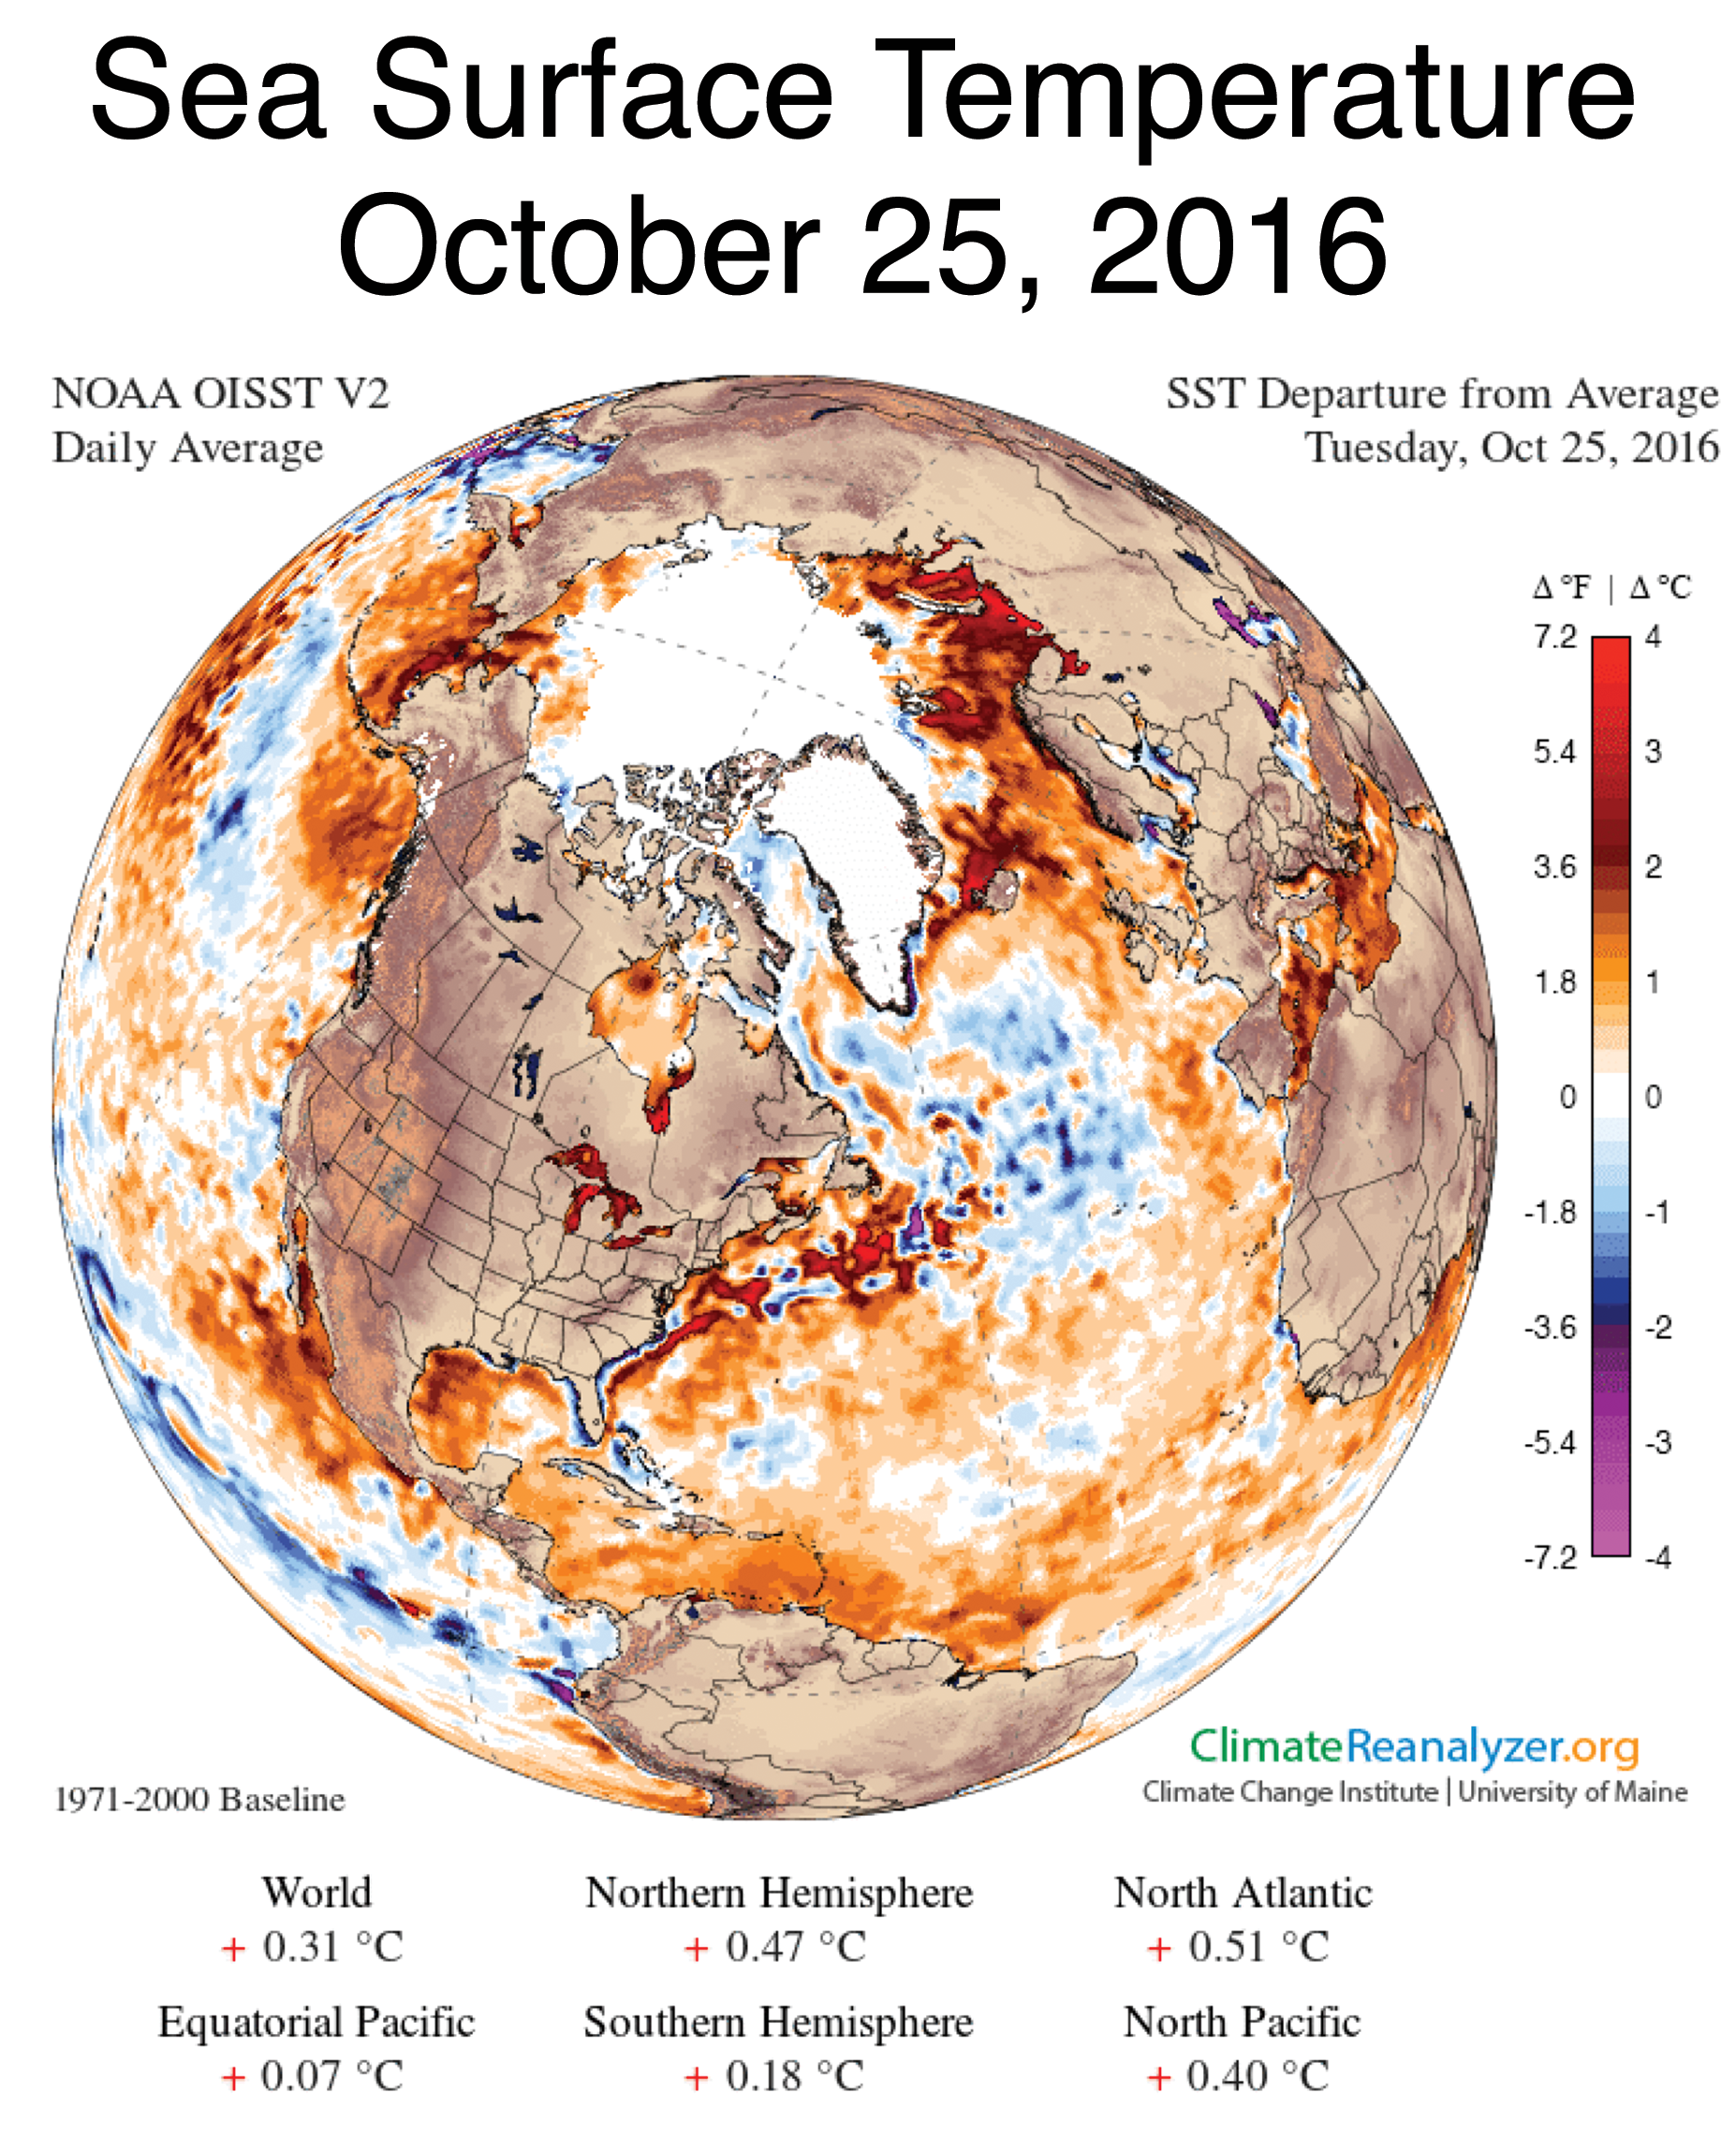 Sea surface temperatures (SSTs) in October were unusually high over the Chukchi and Beaufort Seas, as well as the Barents and Kara Seas along the Eurasian coast, helping to limit ice growth. This figure shows SSTs on October 25, 2016. Credit: Climate Change Institute/University of Maine